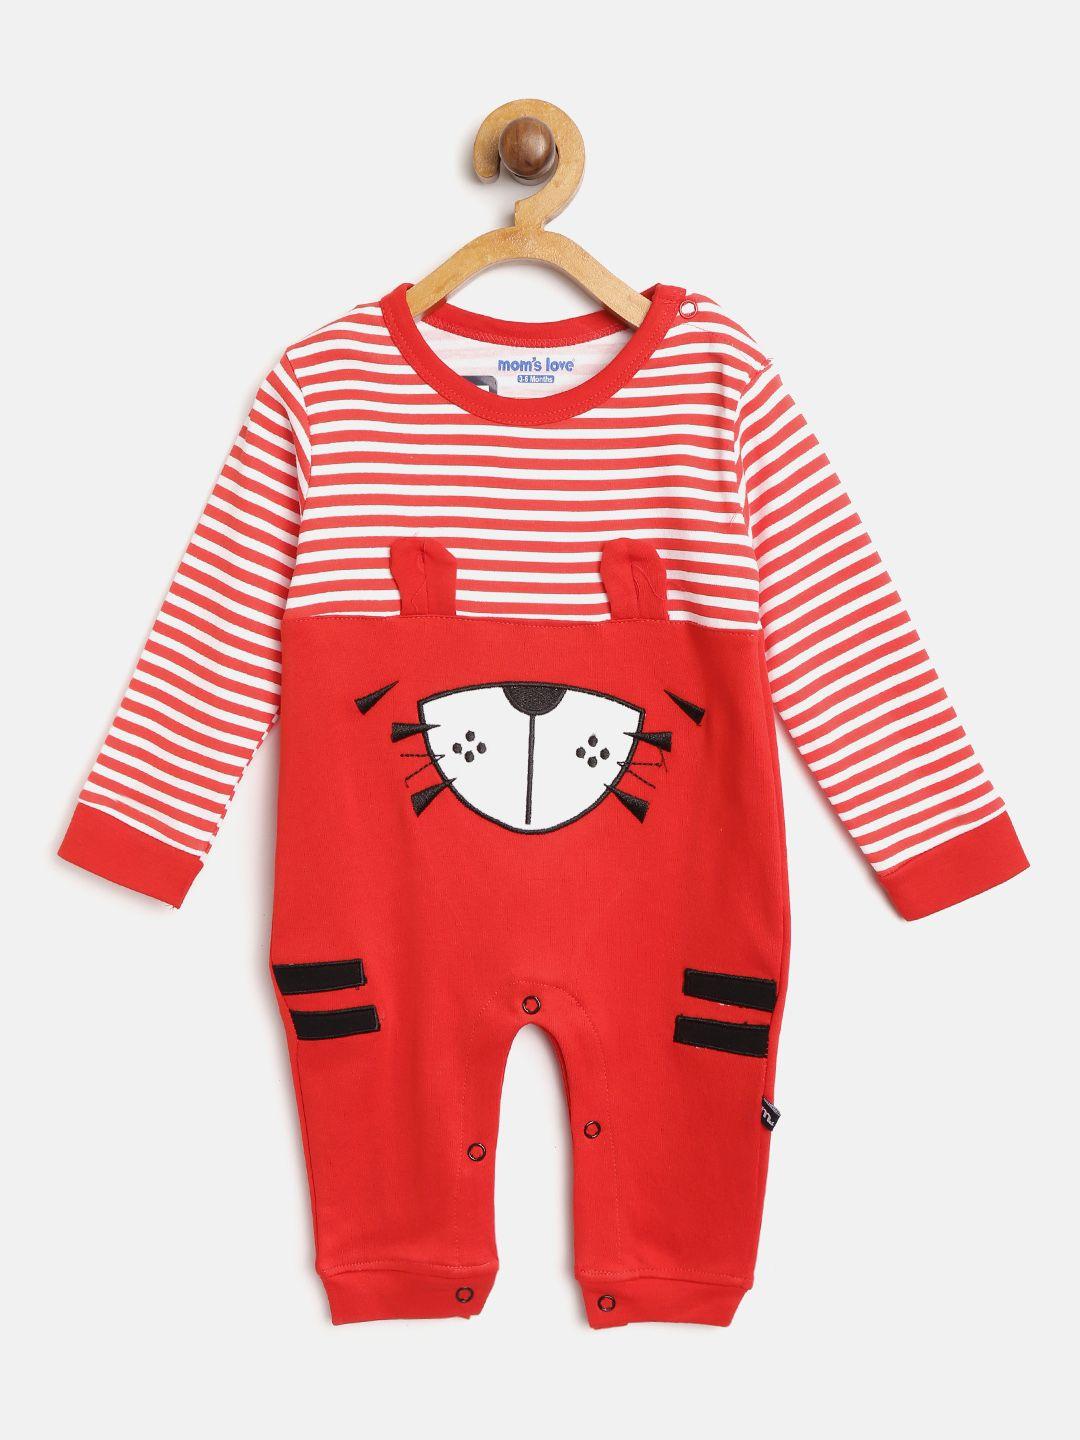 moms-love-boys-red-&-white-striped-rompers-with-applique-detail